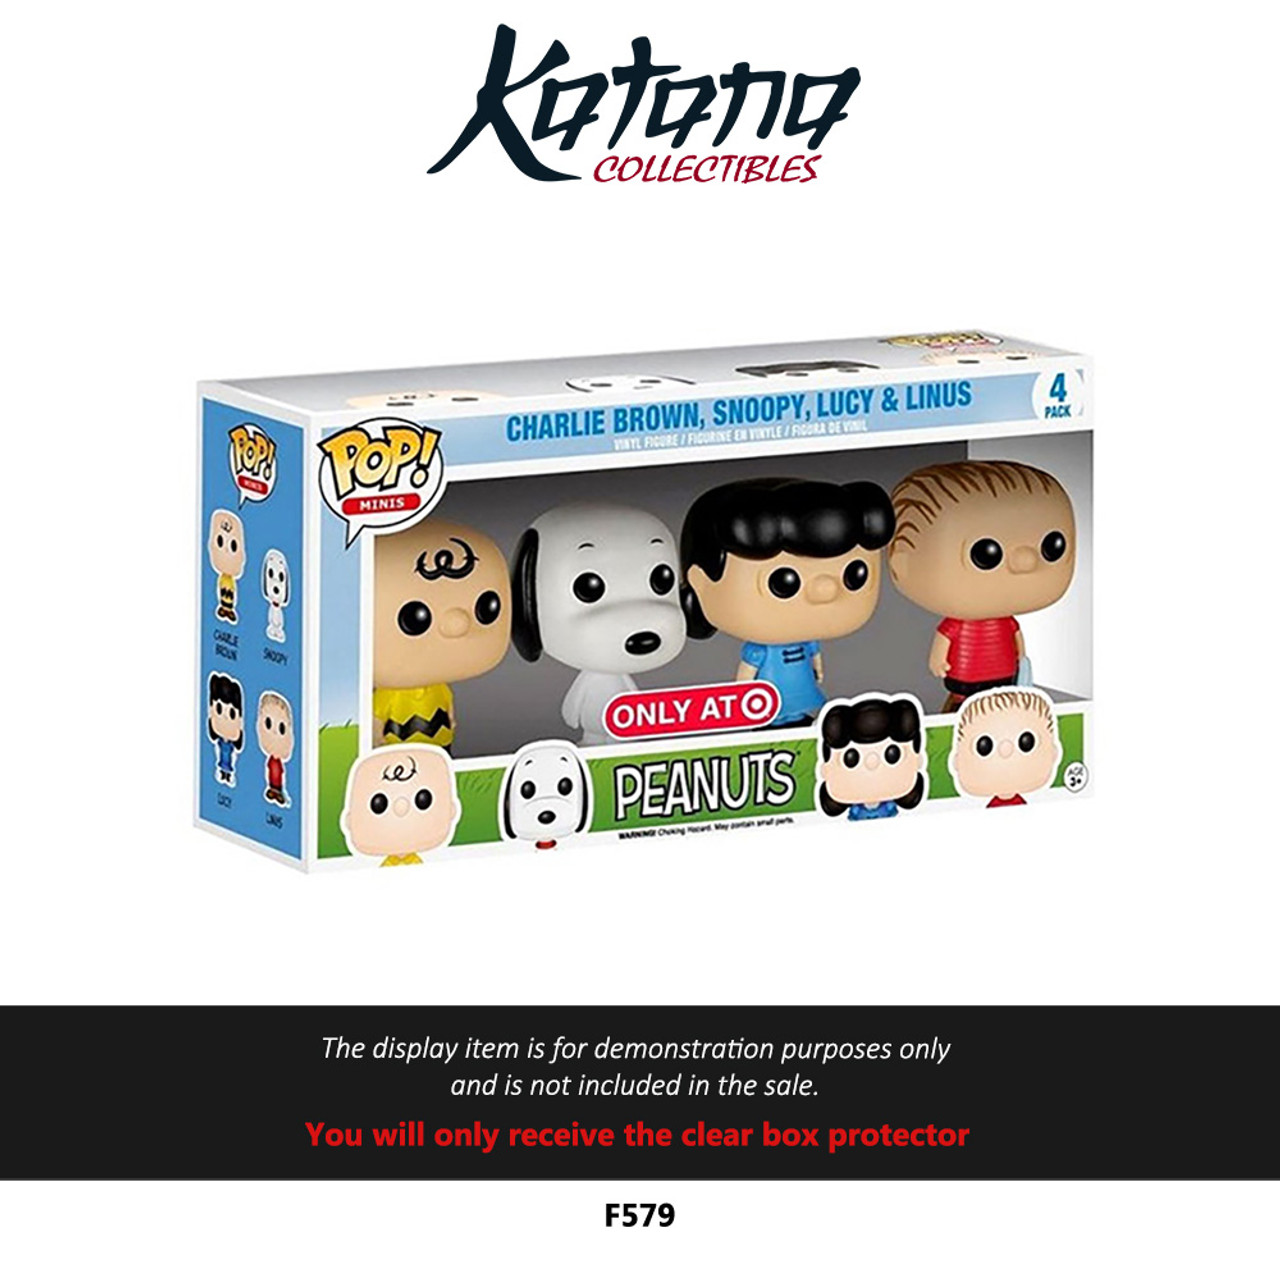 Katana Collectibles Protector For Funko POP! Minis Peanuts 4-pack